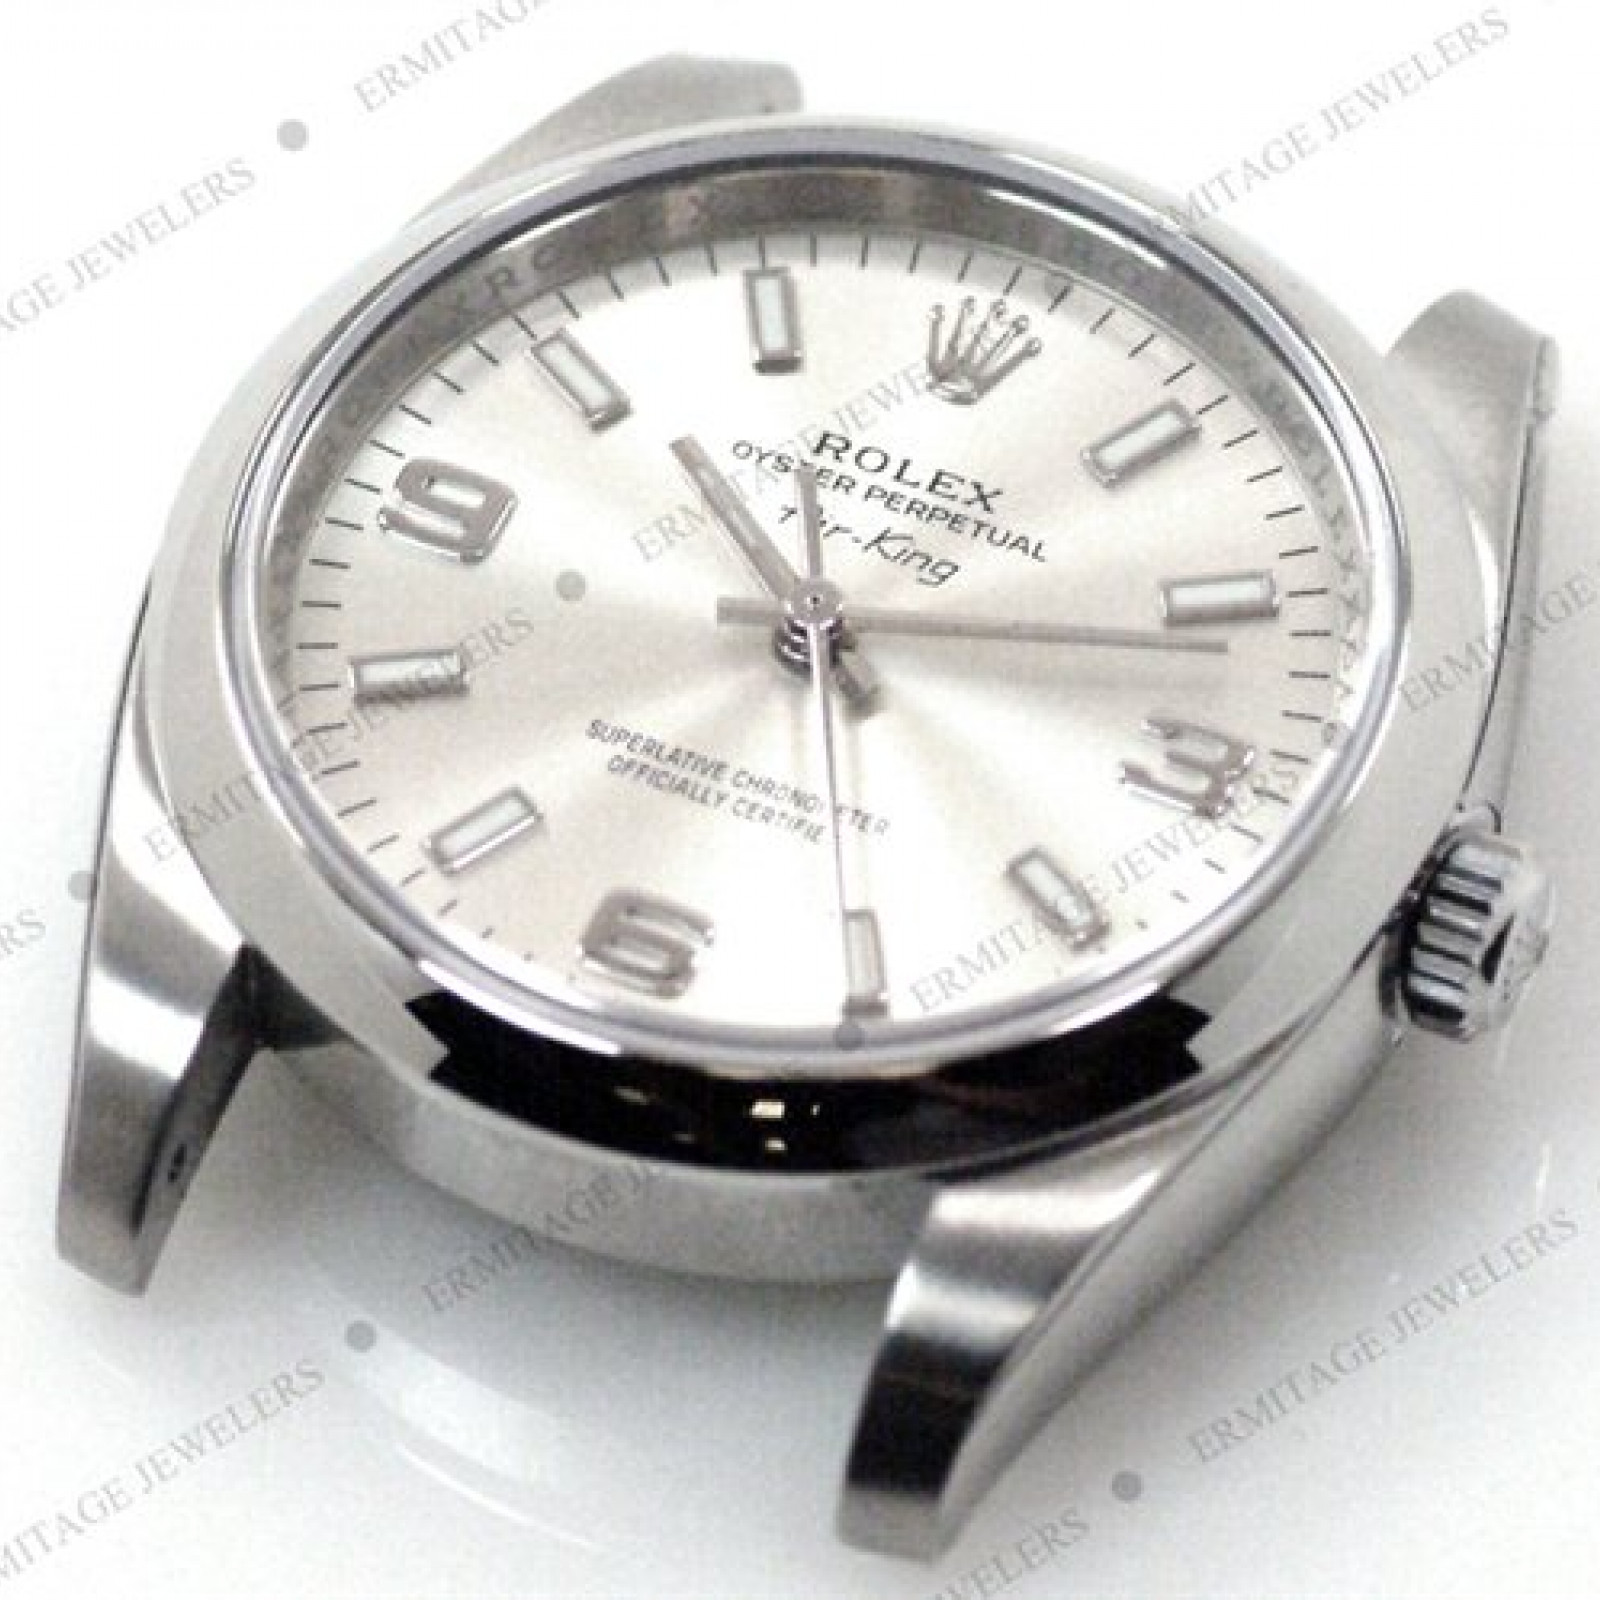 Used Steel Rolex Oyster Perpetual Air King 114200